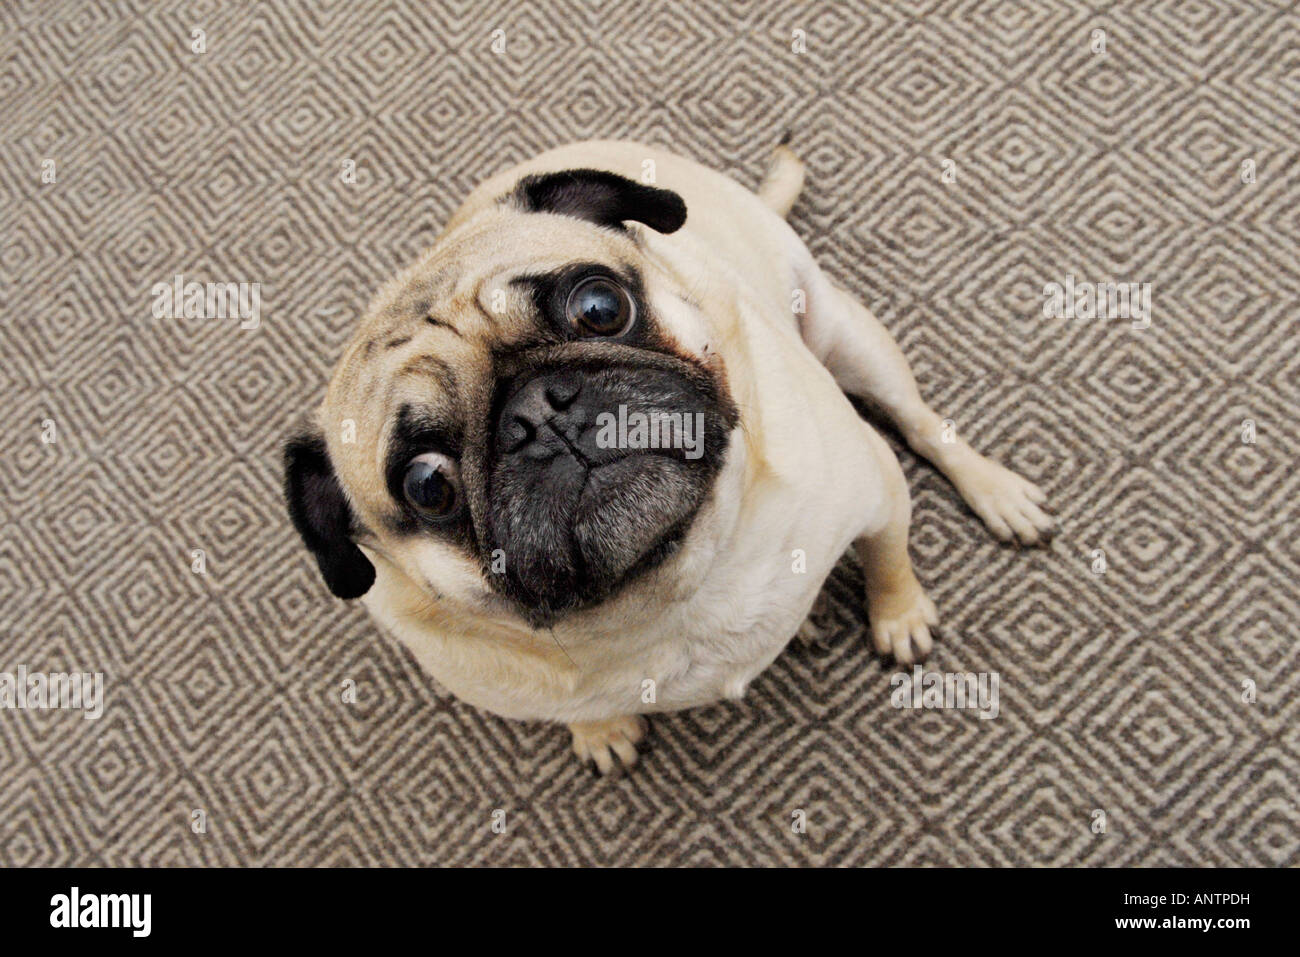 Pug dog looking up and worried Stock Photo